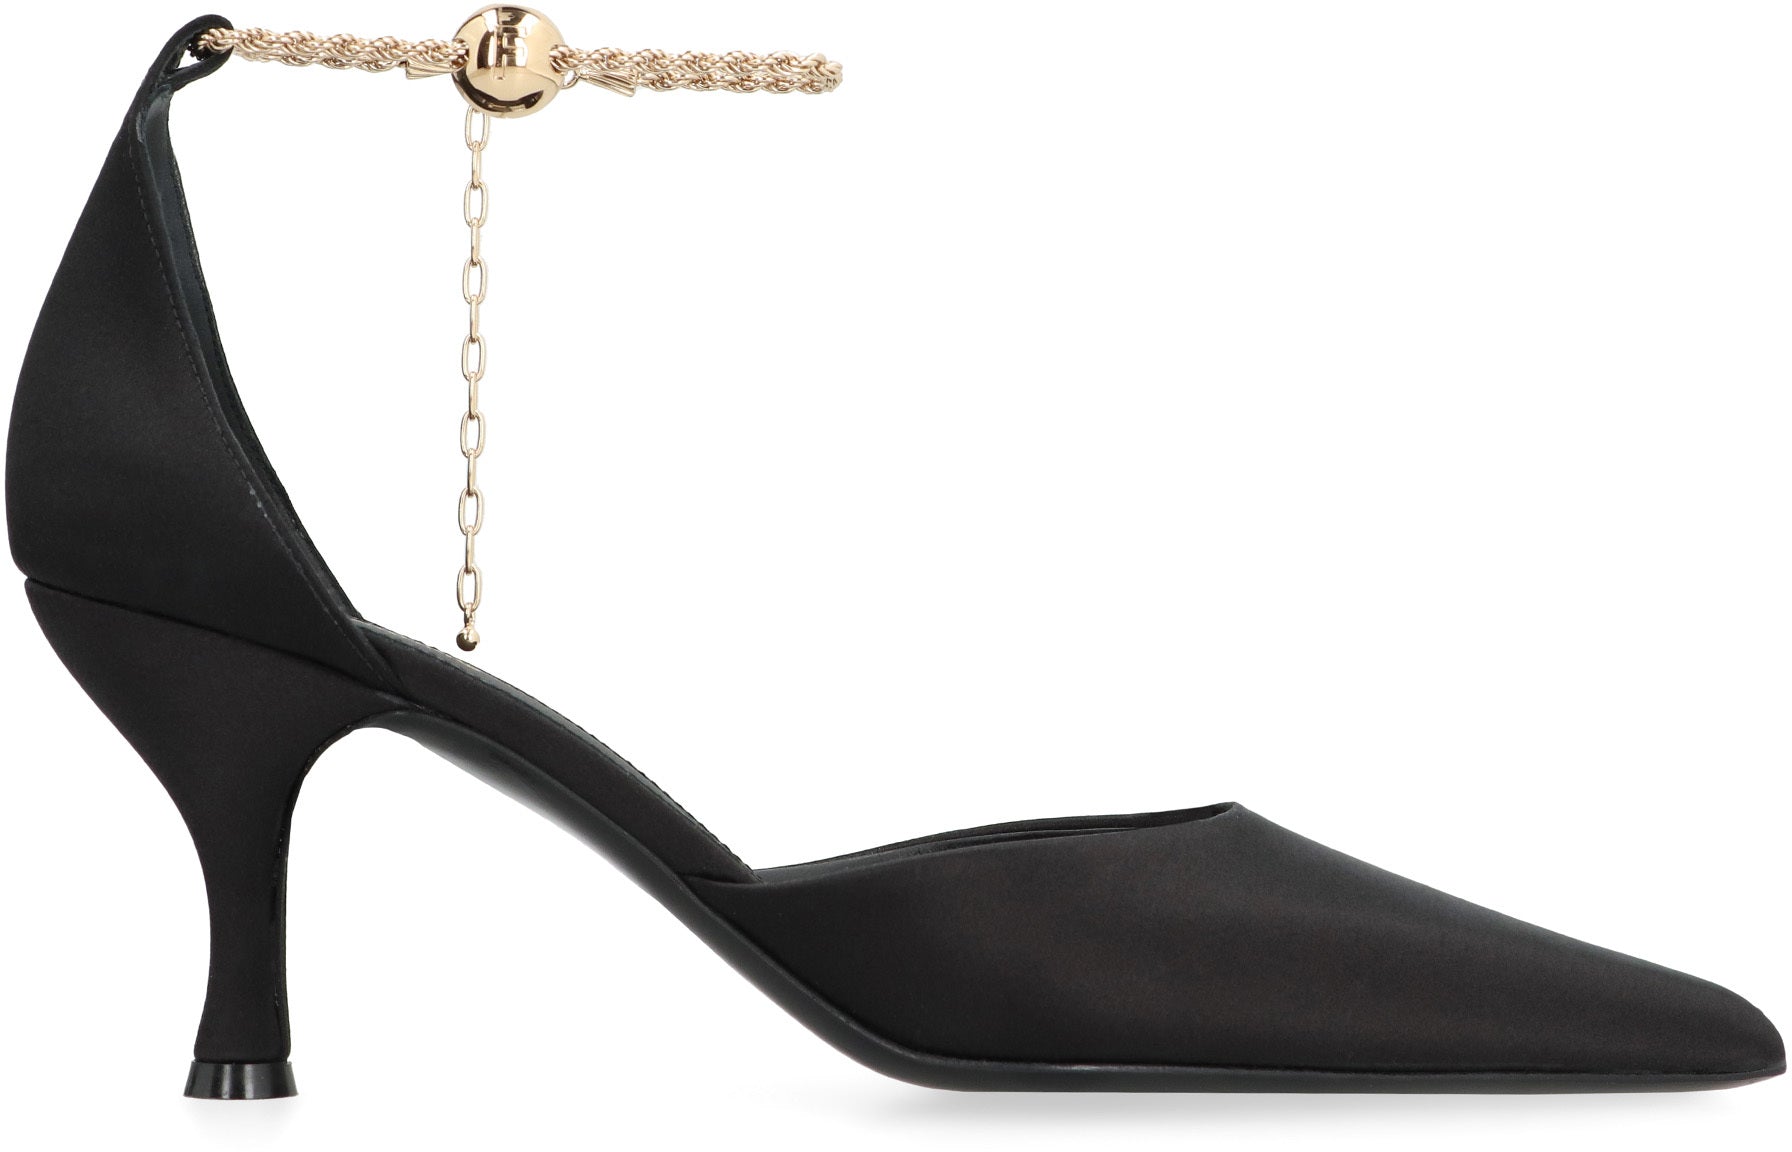 Shop Ferragamo Satin Slingback Pumps With Adjustable Ankle Strap And Stiletto Heel For Women In Black